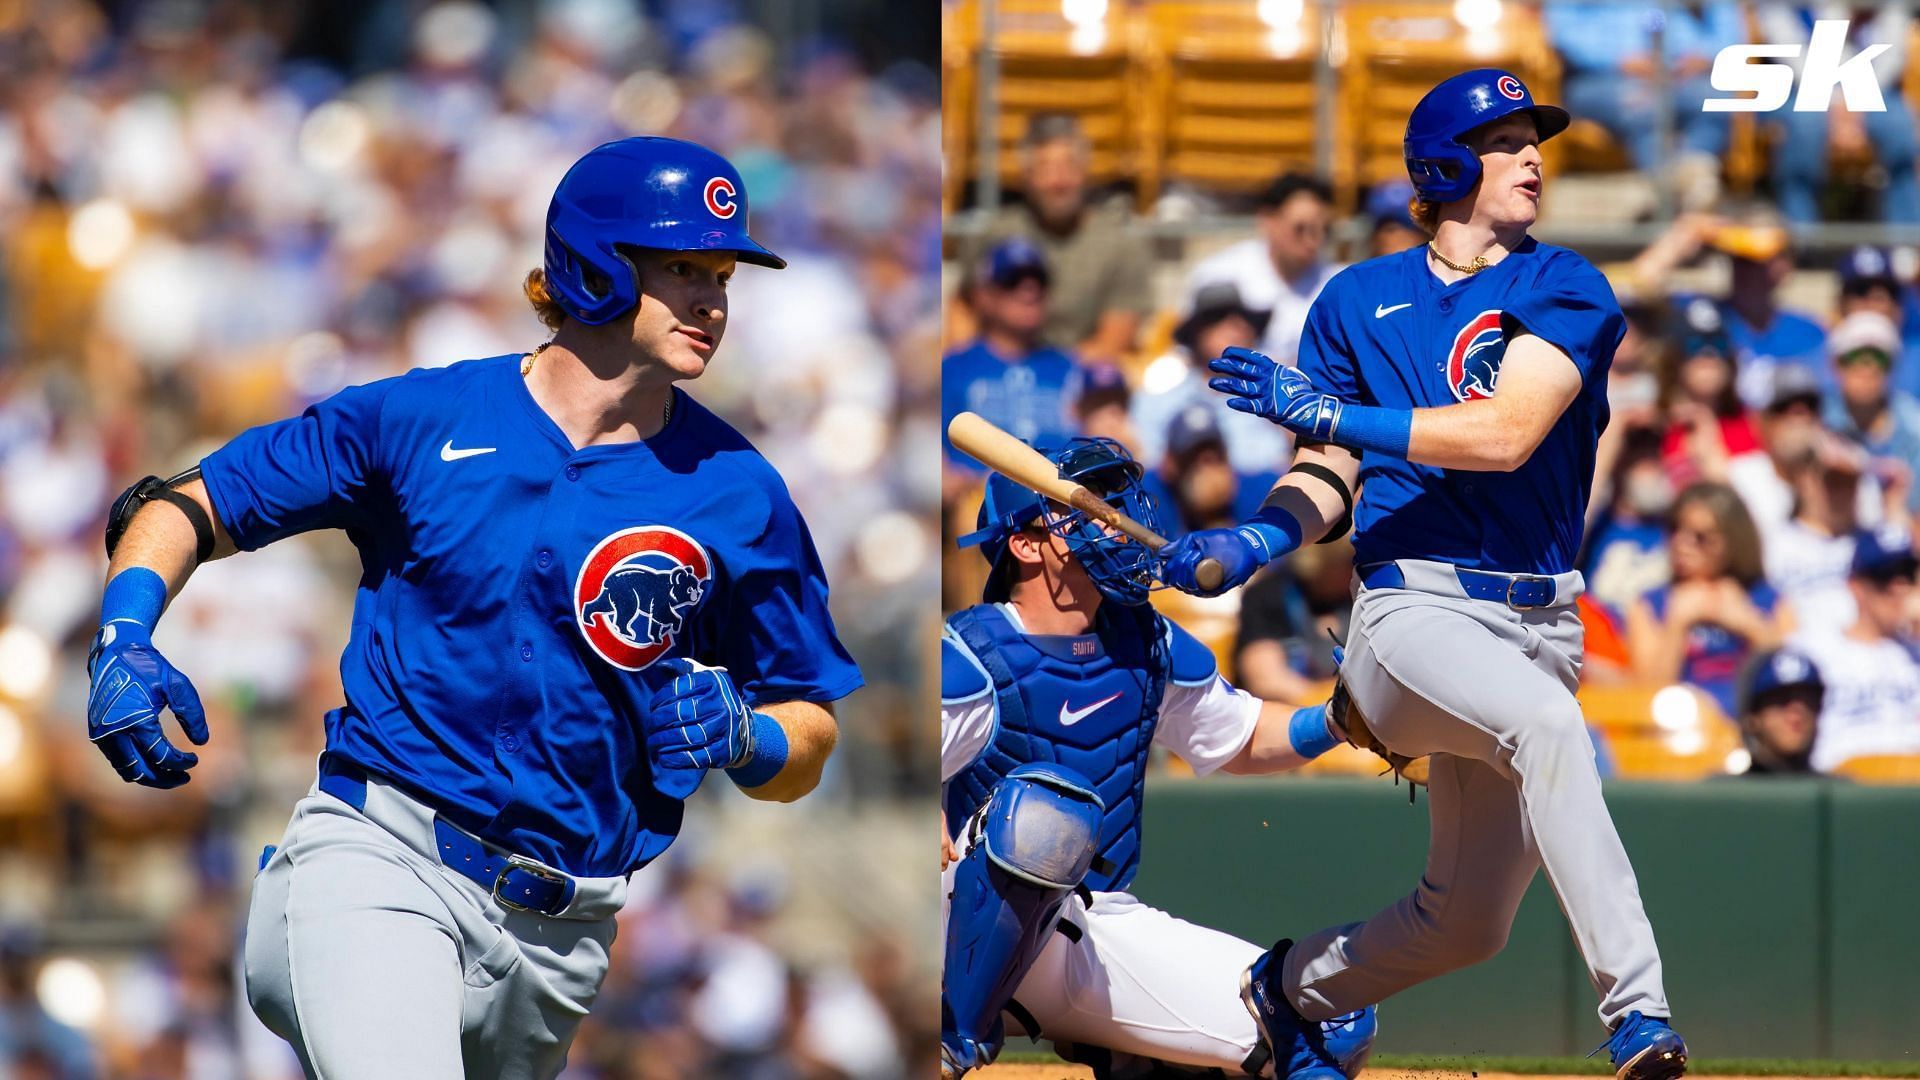 Owen Caissie has developed into one of the Chicago Cubs top prospects